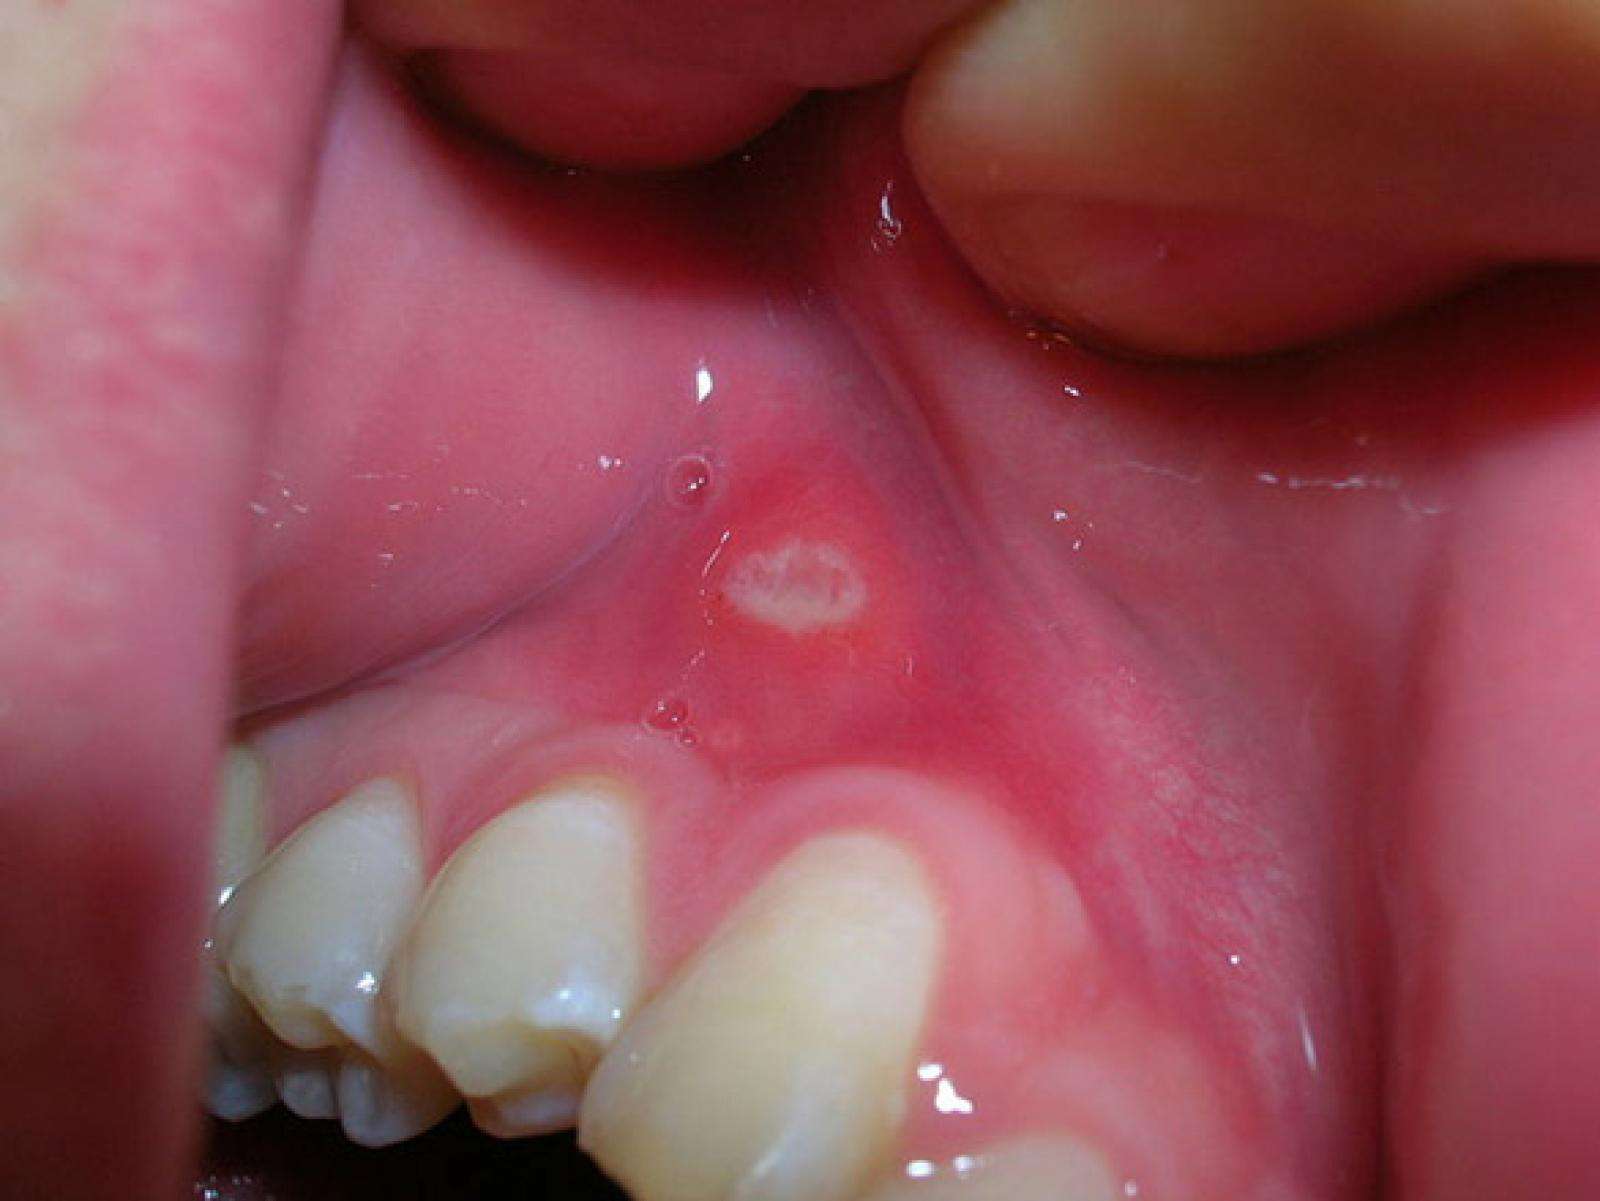 Mouth Ulcers